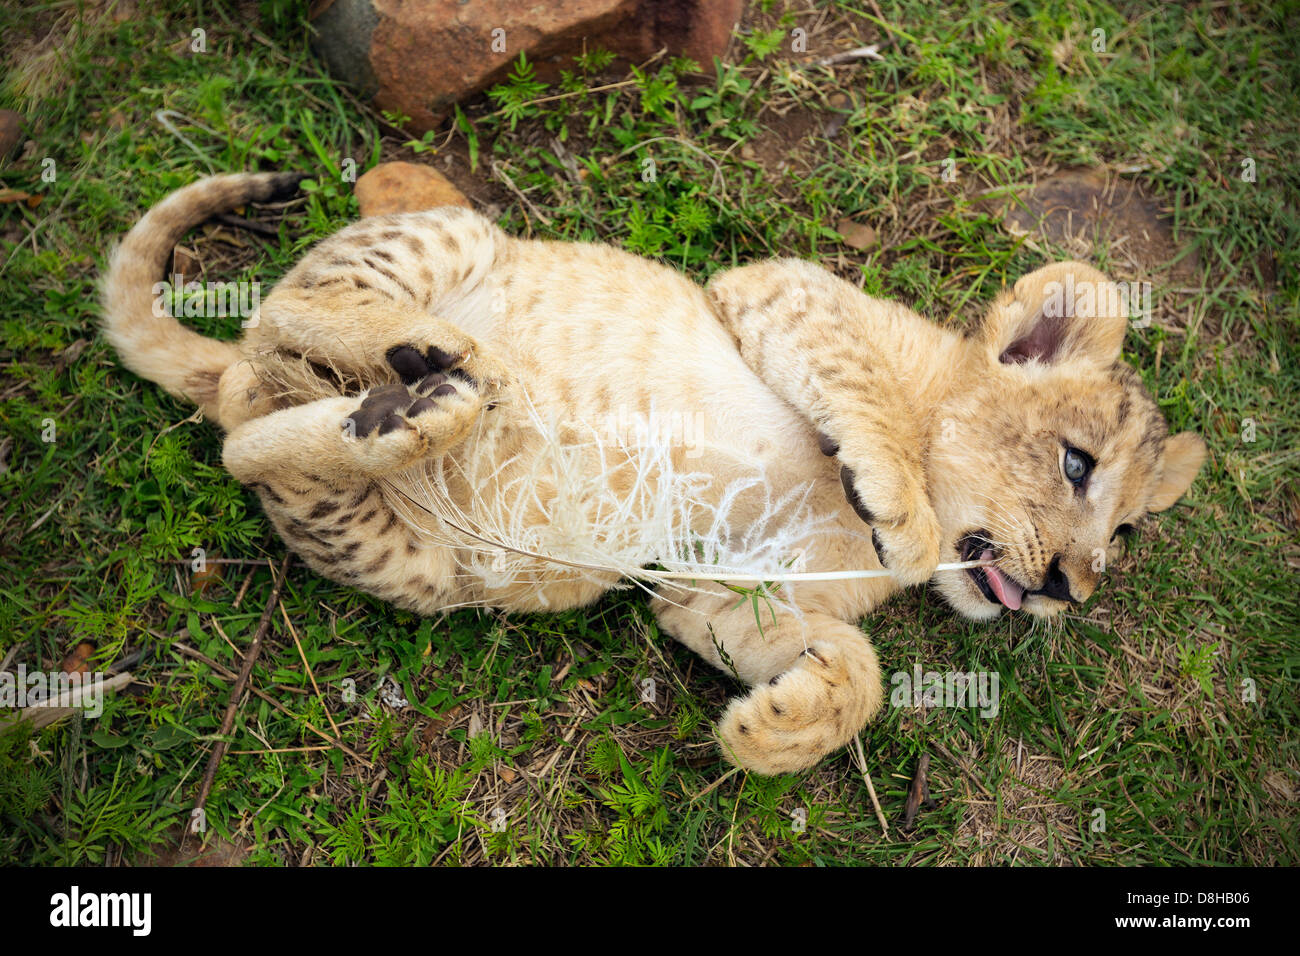 Lion cub on its back playing with a feather Stock Photo